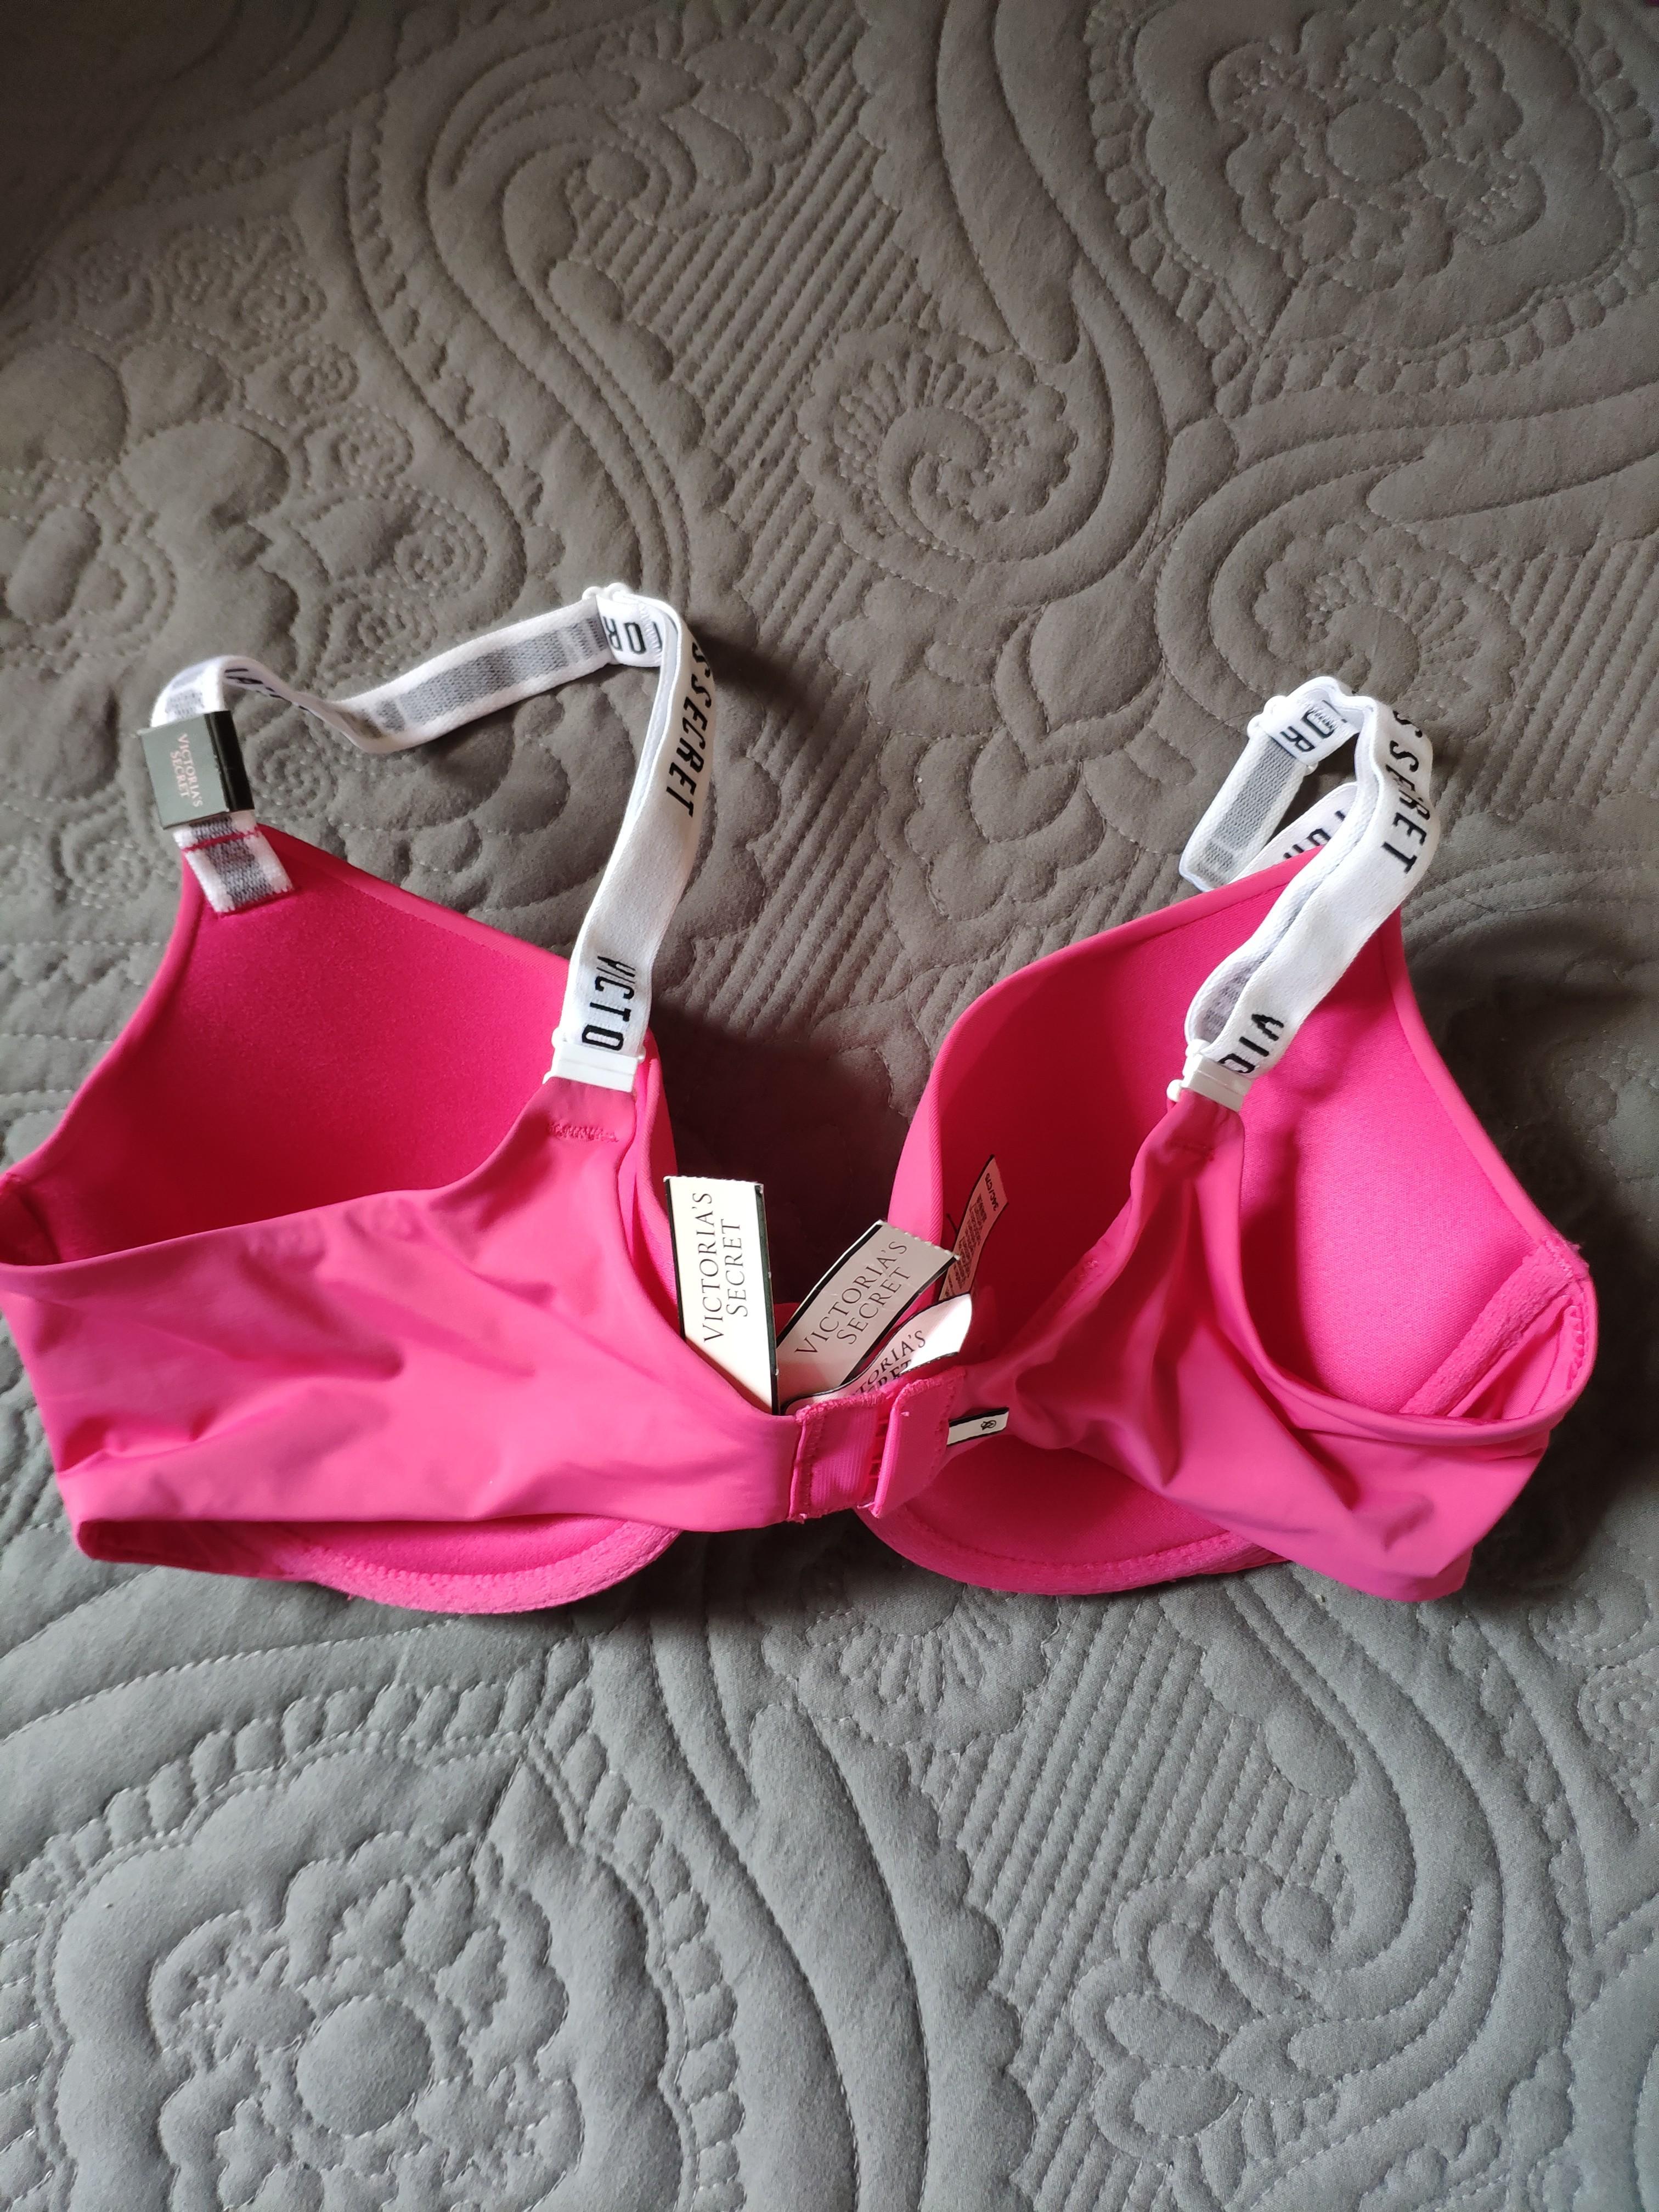 Victoria's Secret Gorgeous Push Up Bra 34C and Med Thong New in packag